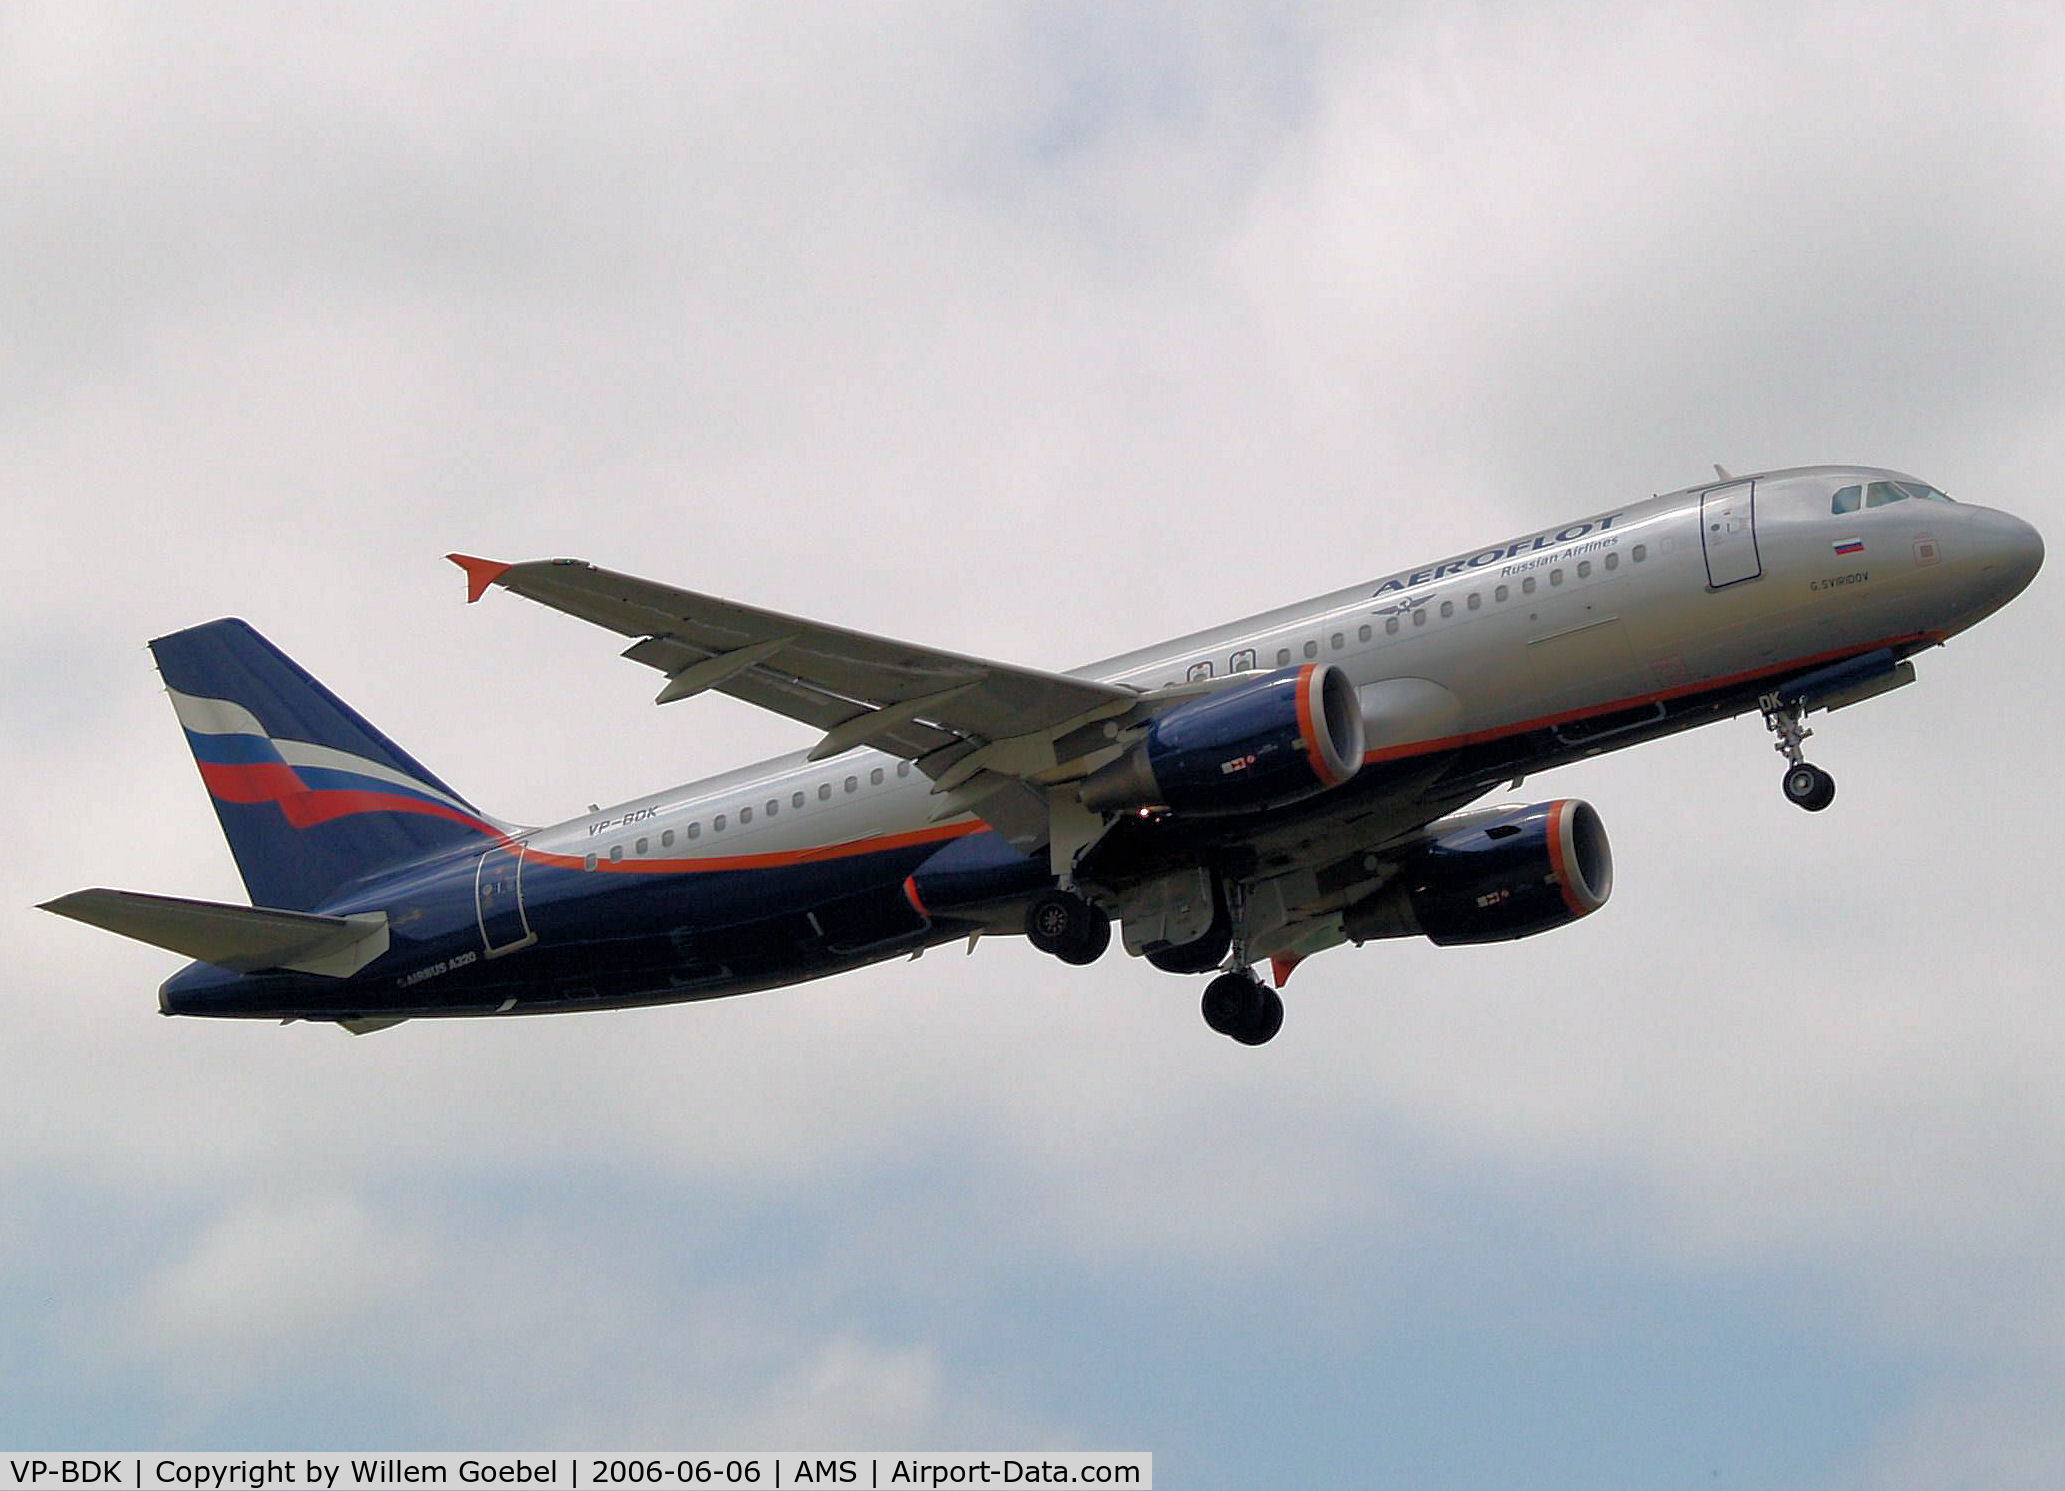 VP-BDK, 2003 Airbus A320-214 C/N 2106, Take off from runway 06 of Amsterdam Airport